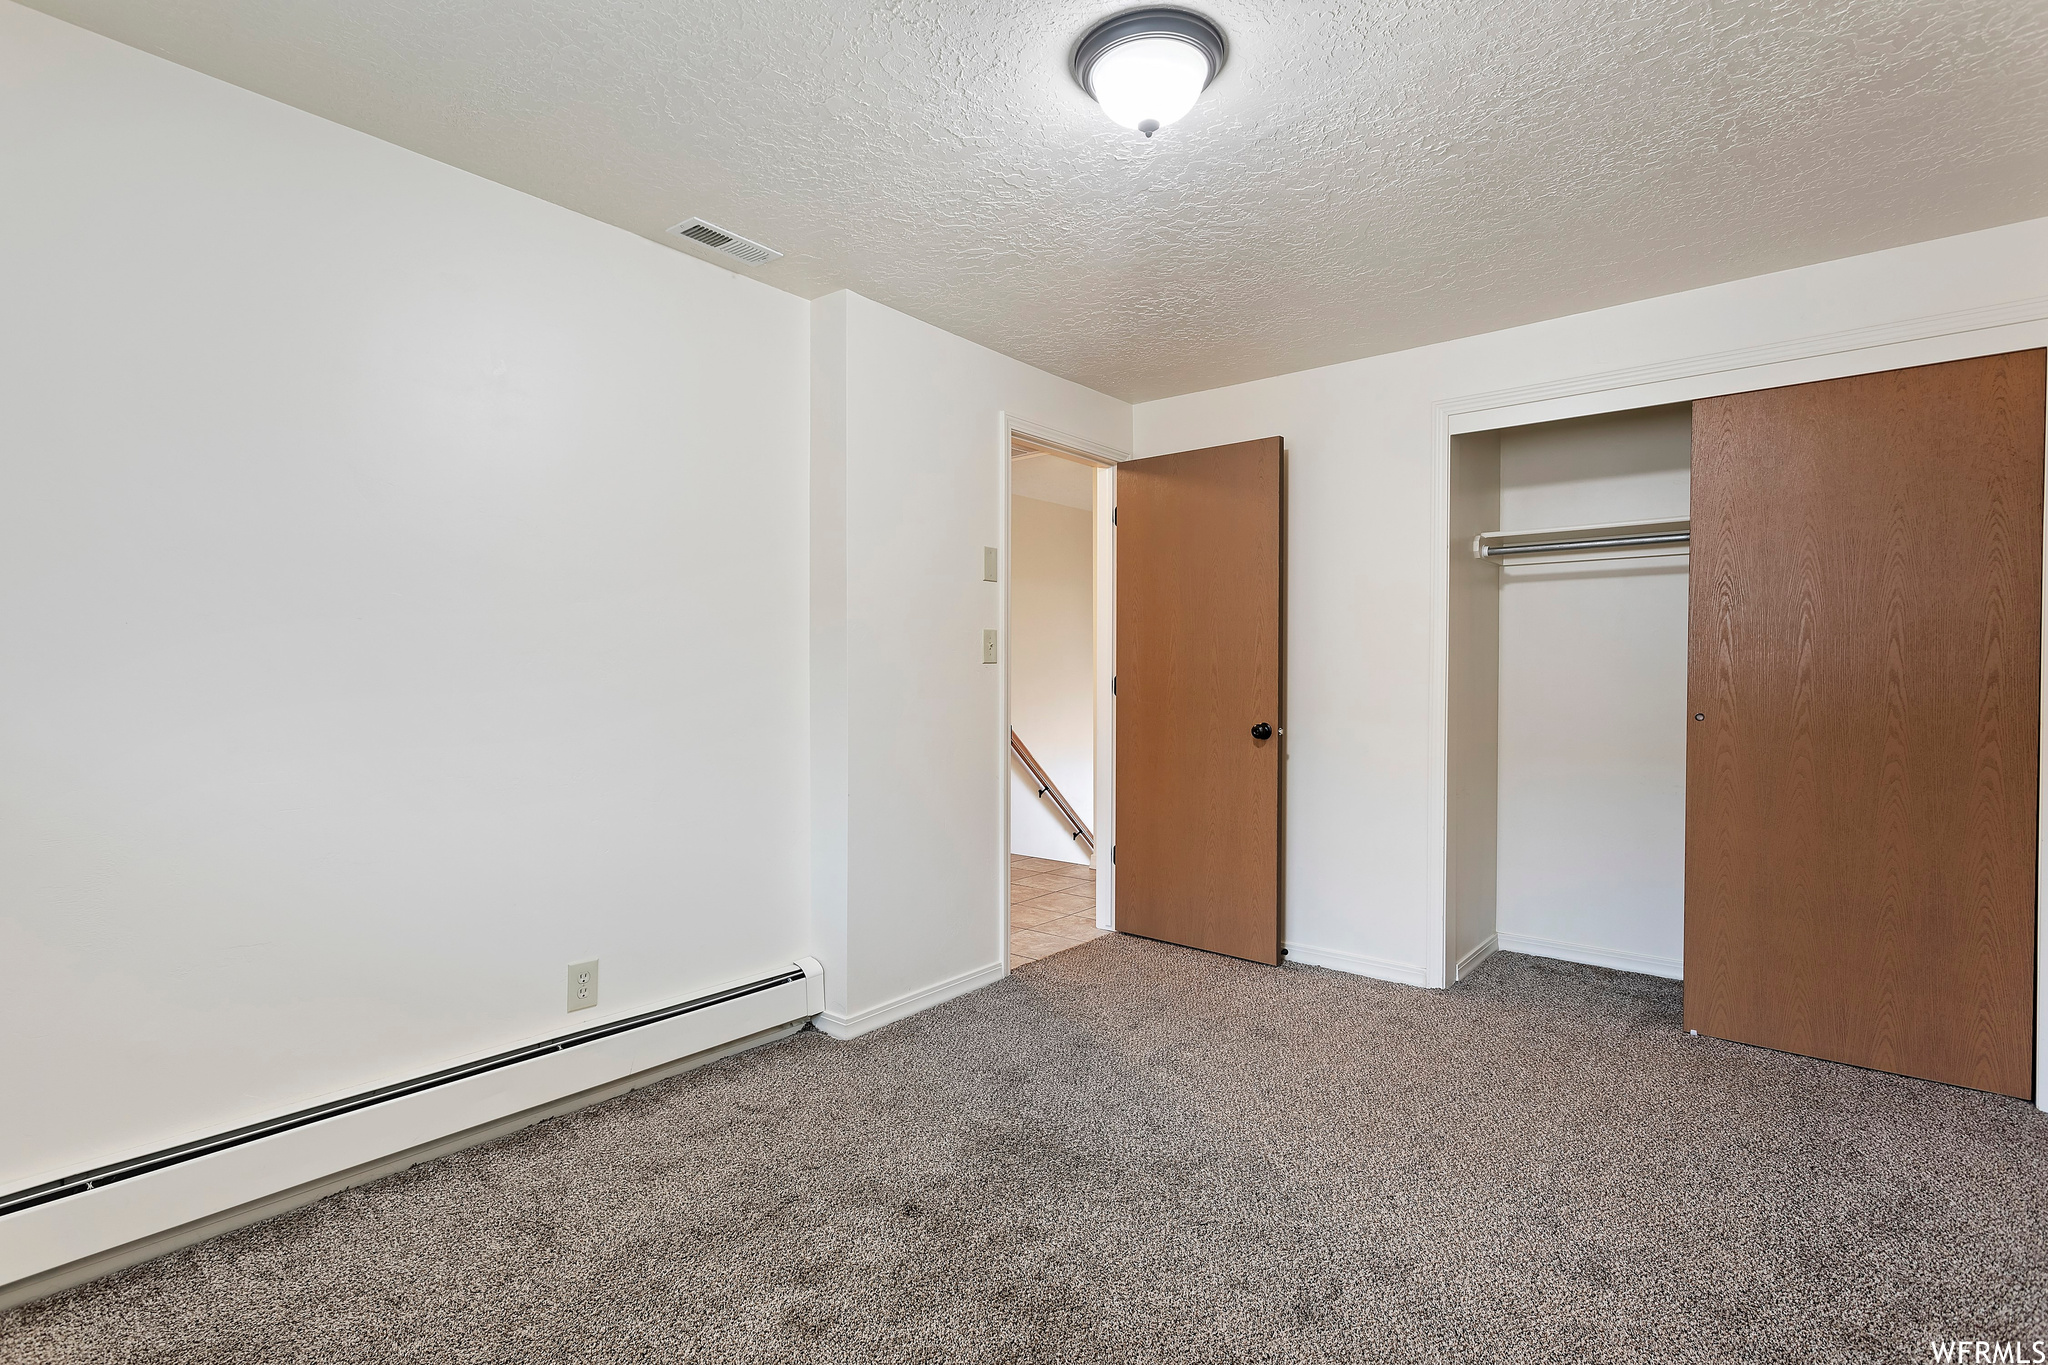 Unfurnished bedroom featuring a closet, baseboard heating, and carpet